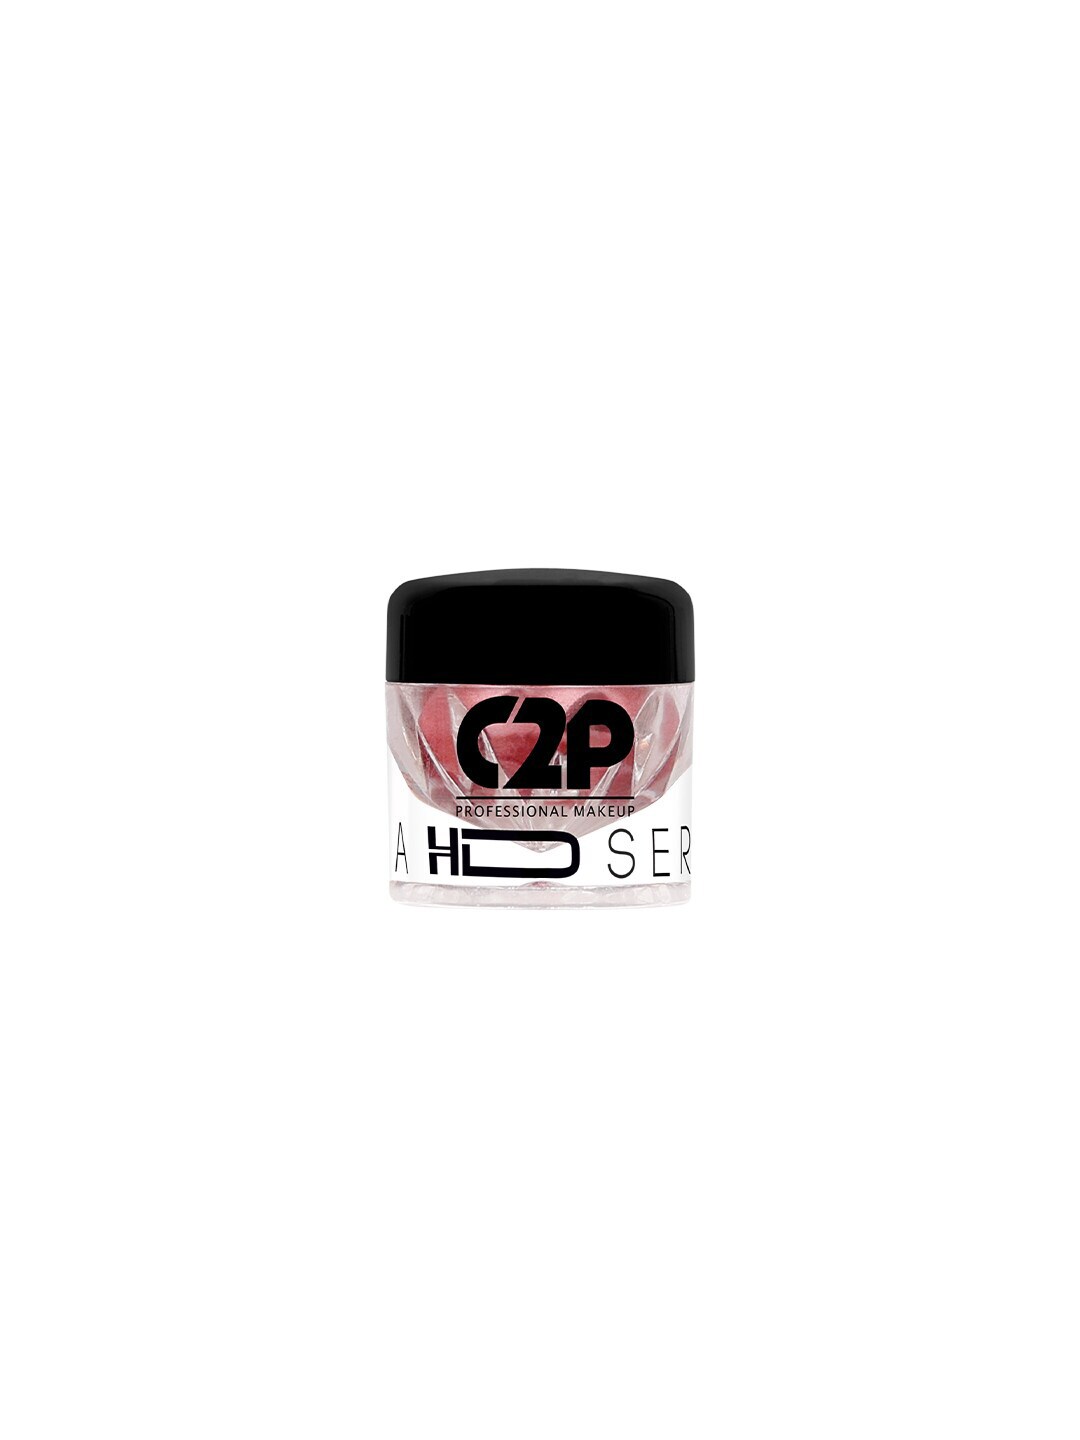 C2P PROFESSIONAL MAKEUP HD Loose Precious Pigments - Hey Girl 76 2 gm Price in India